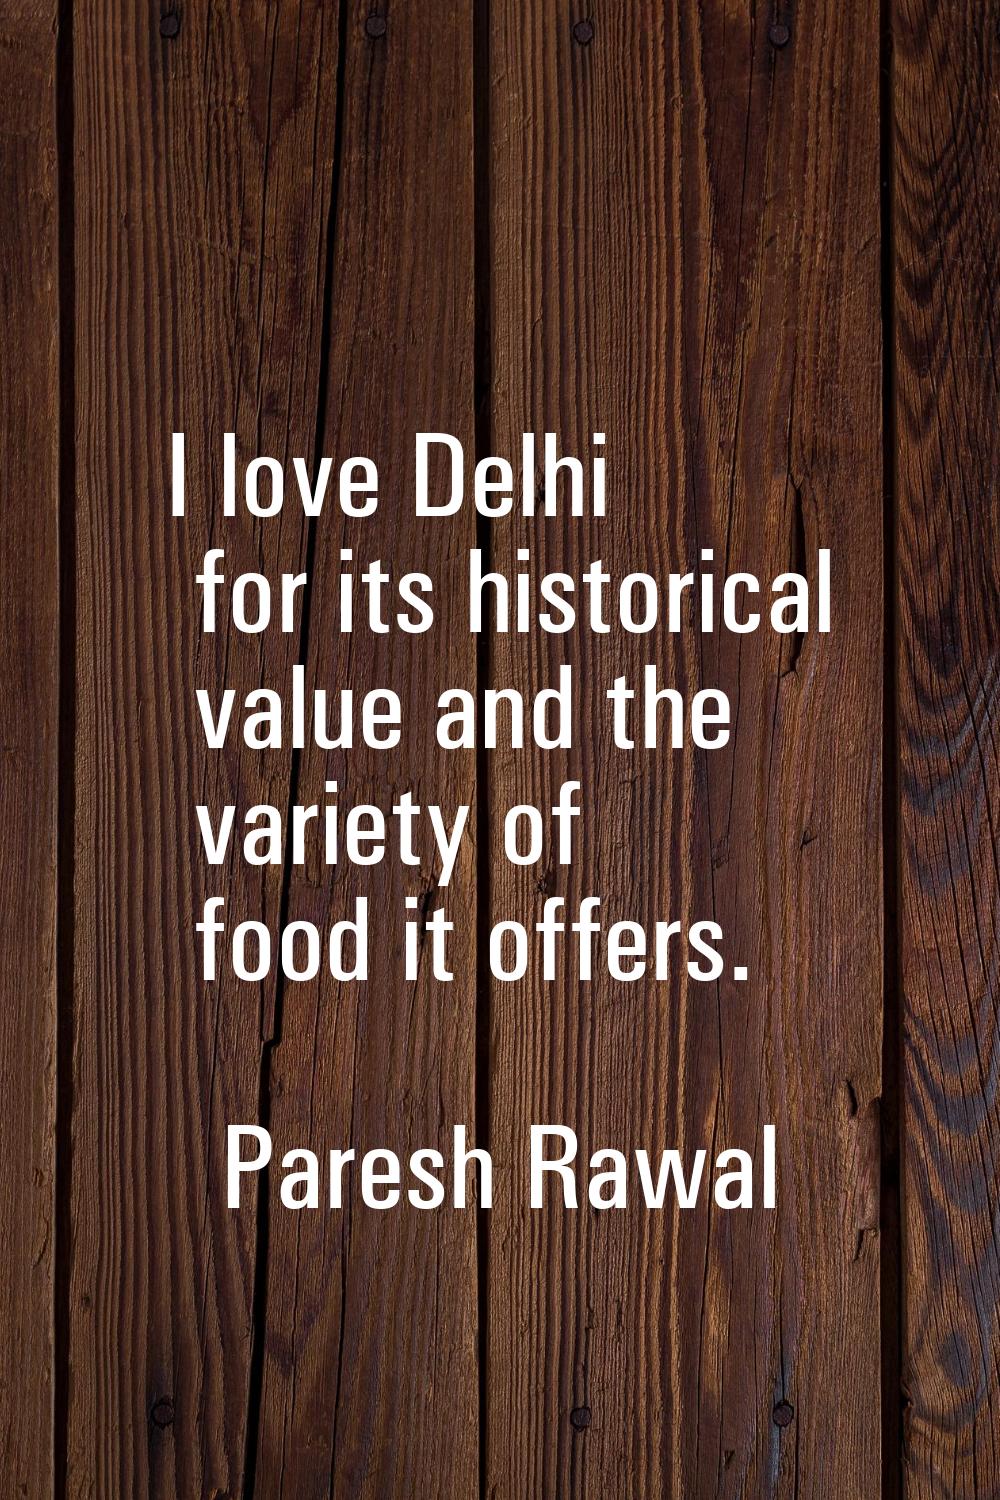 I love Delhi for its historical value and the variety of food it offers.